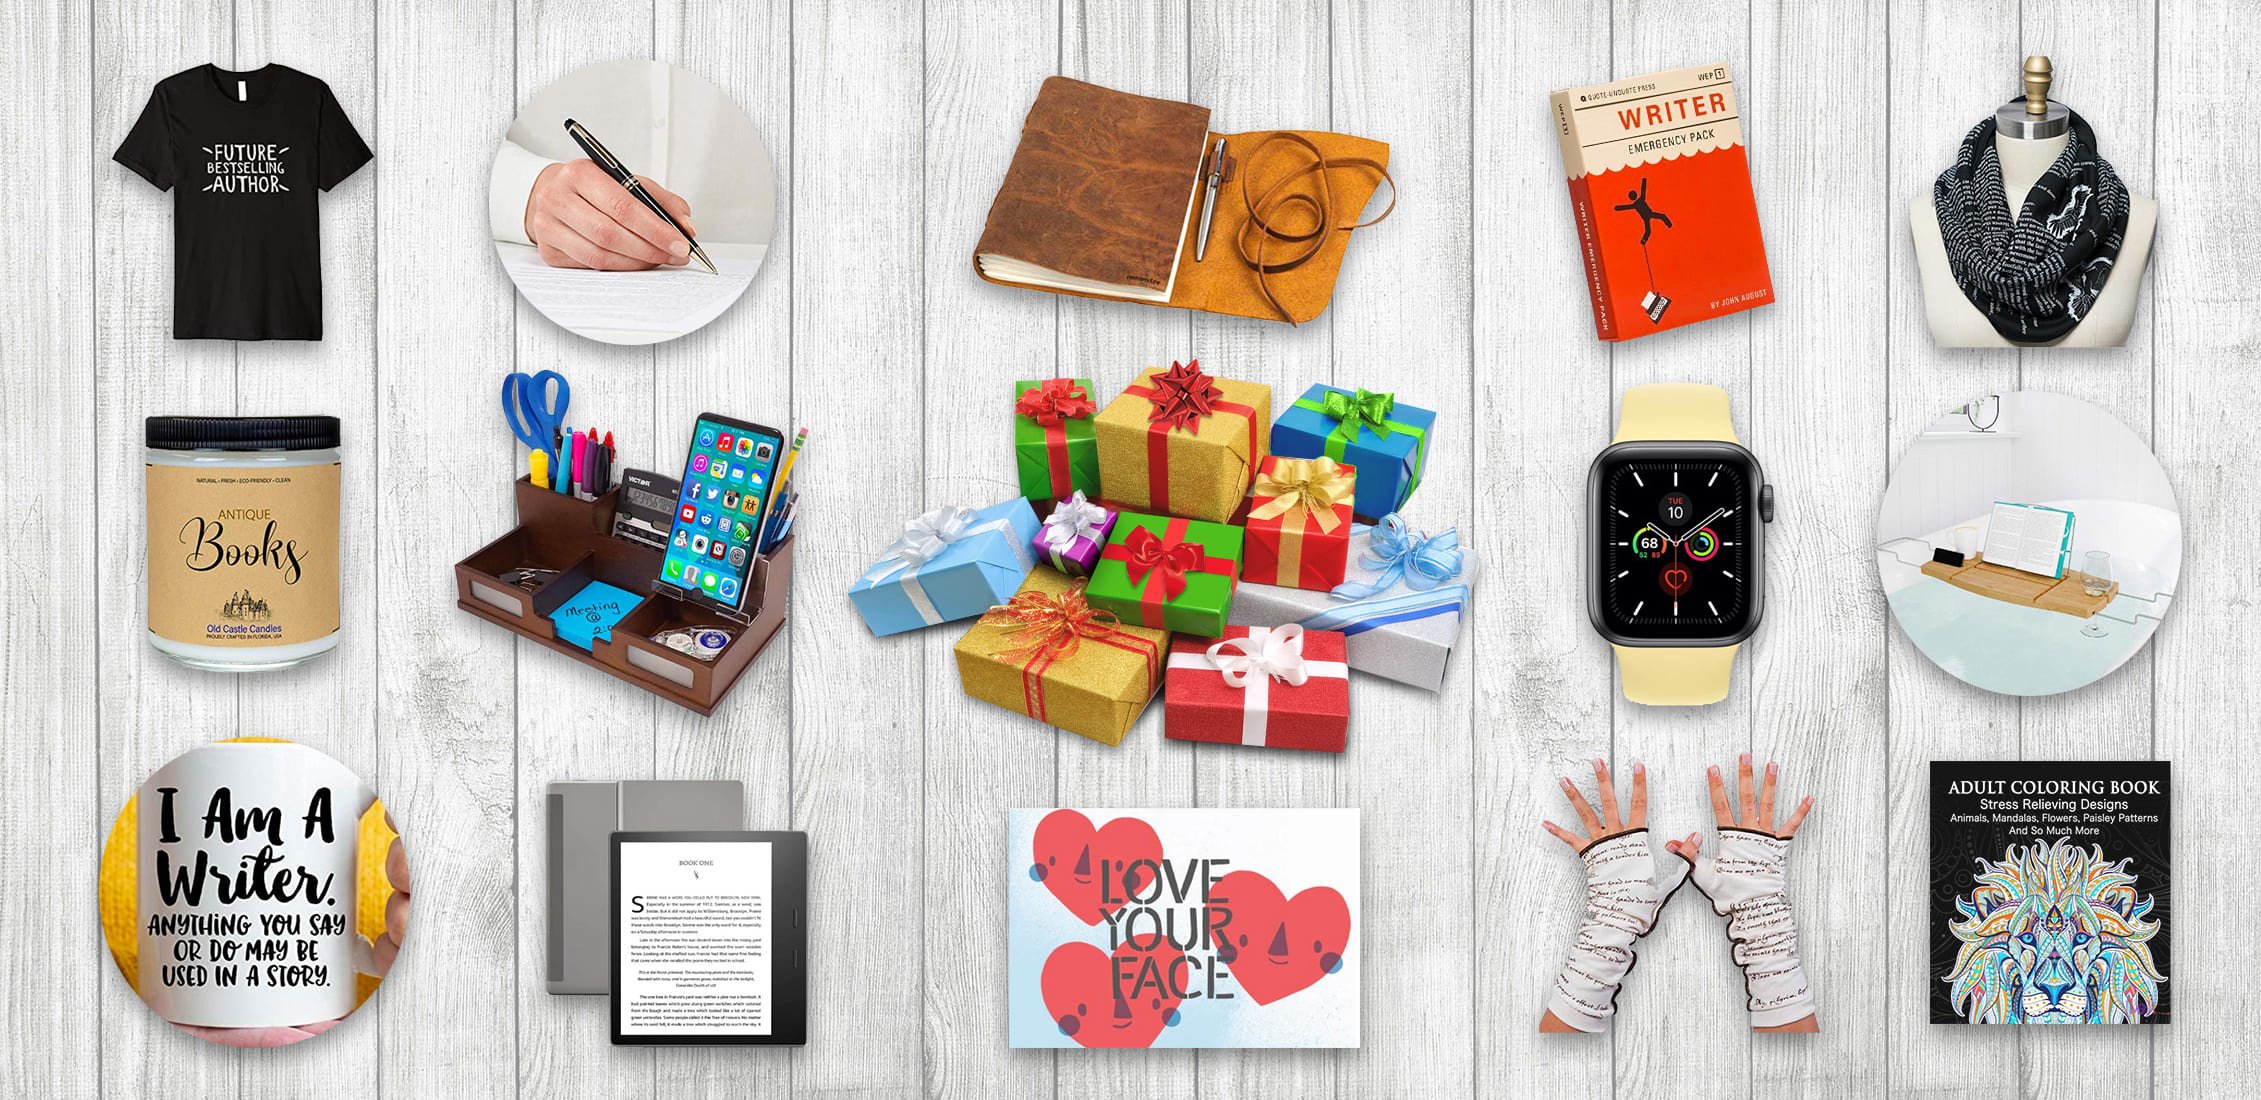 Examples Best Gifts for Writers.